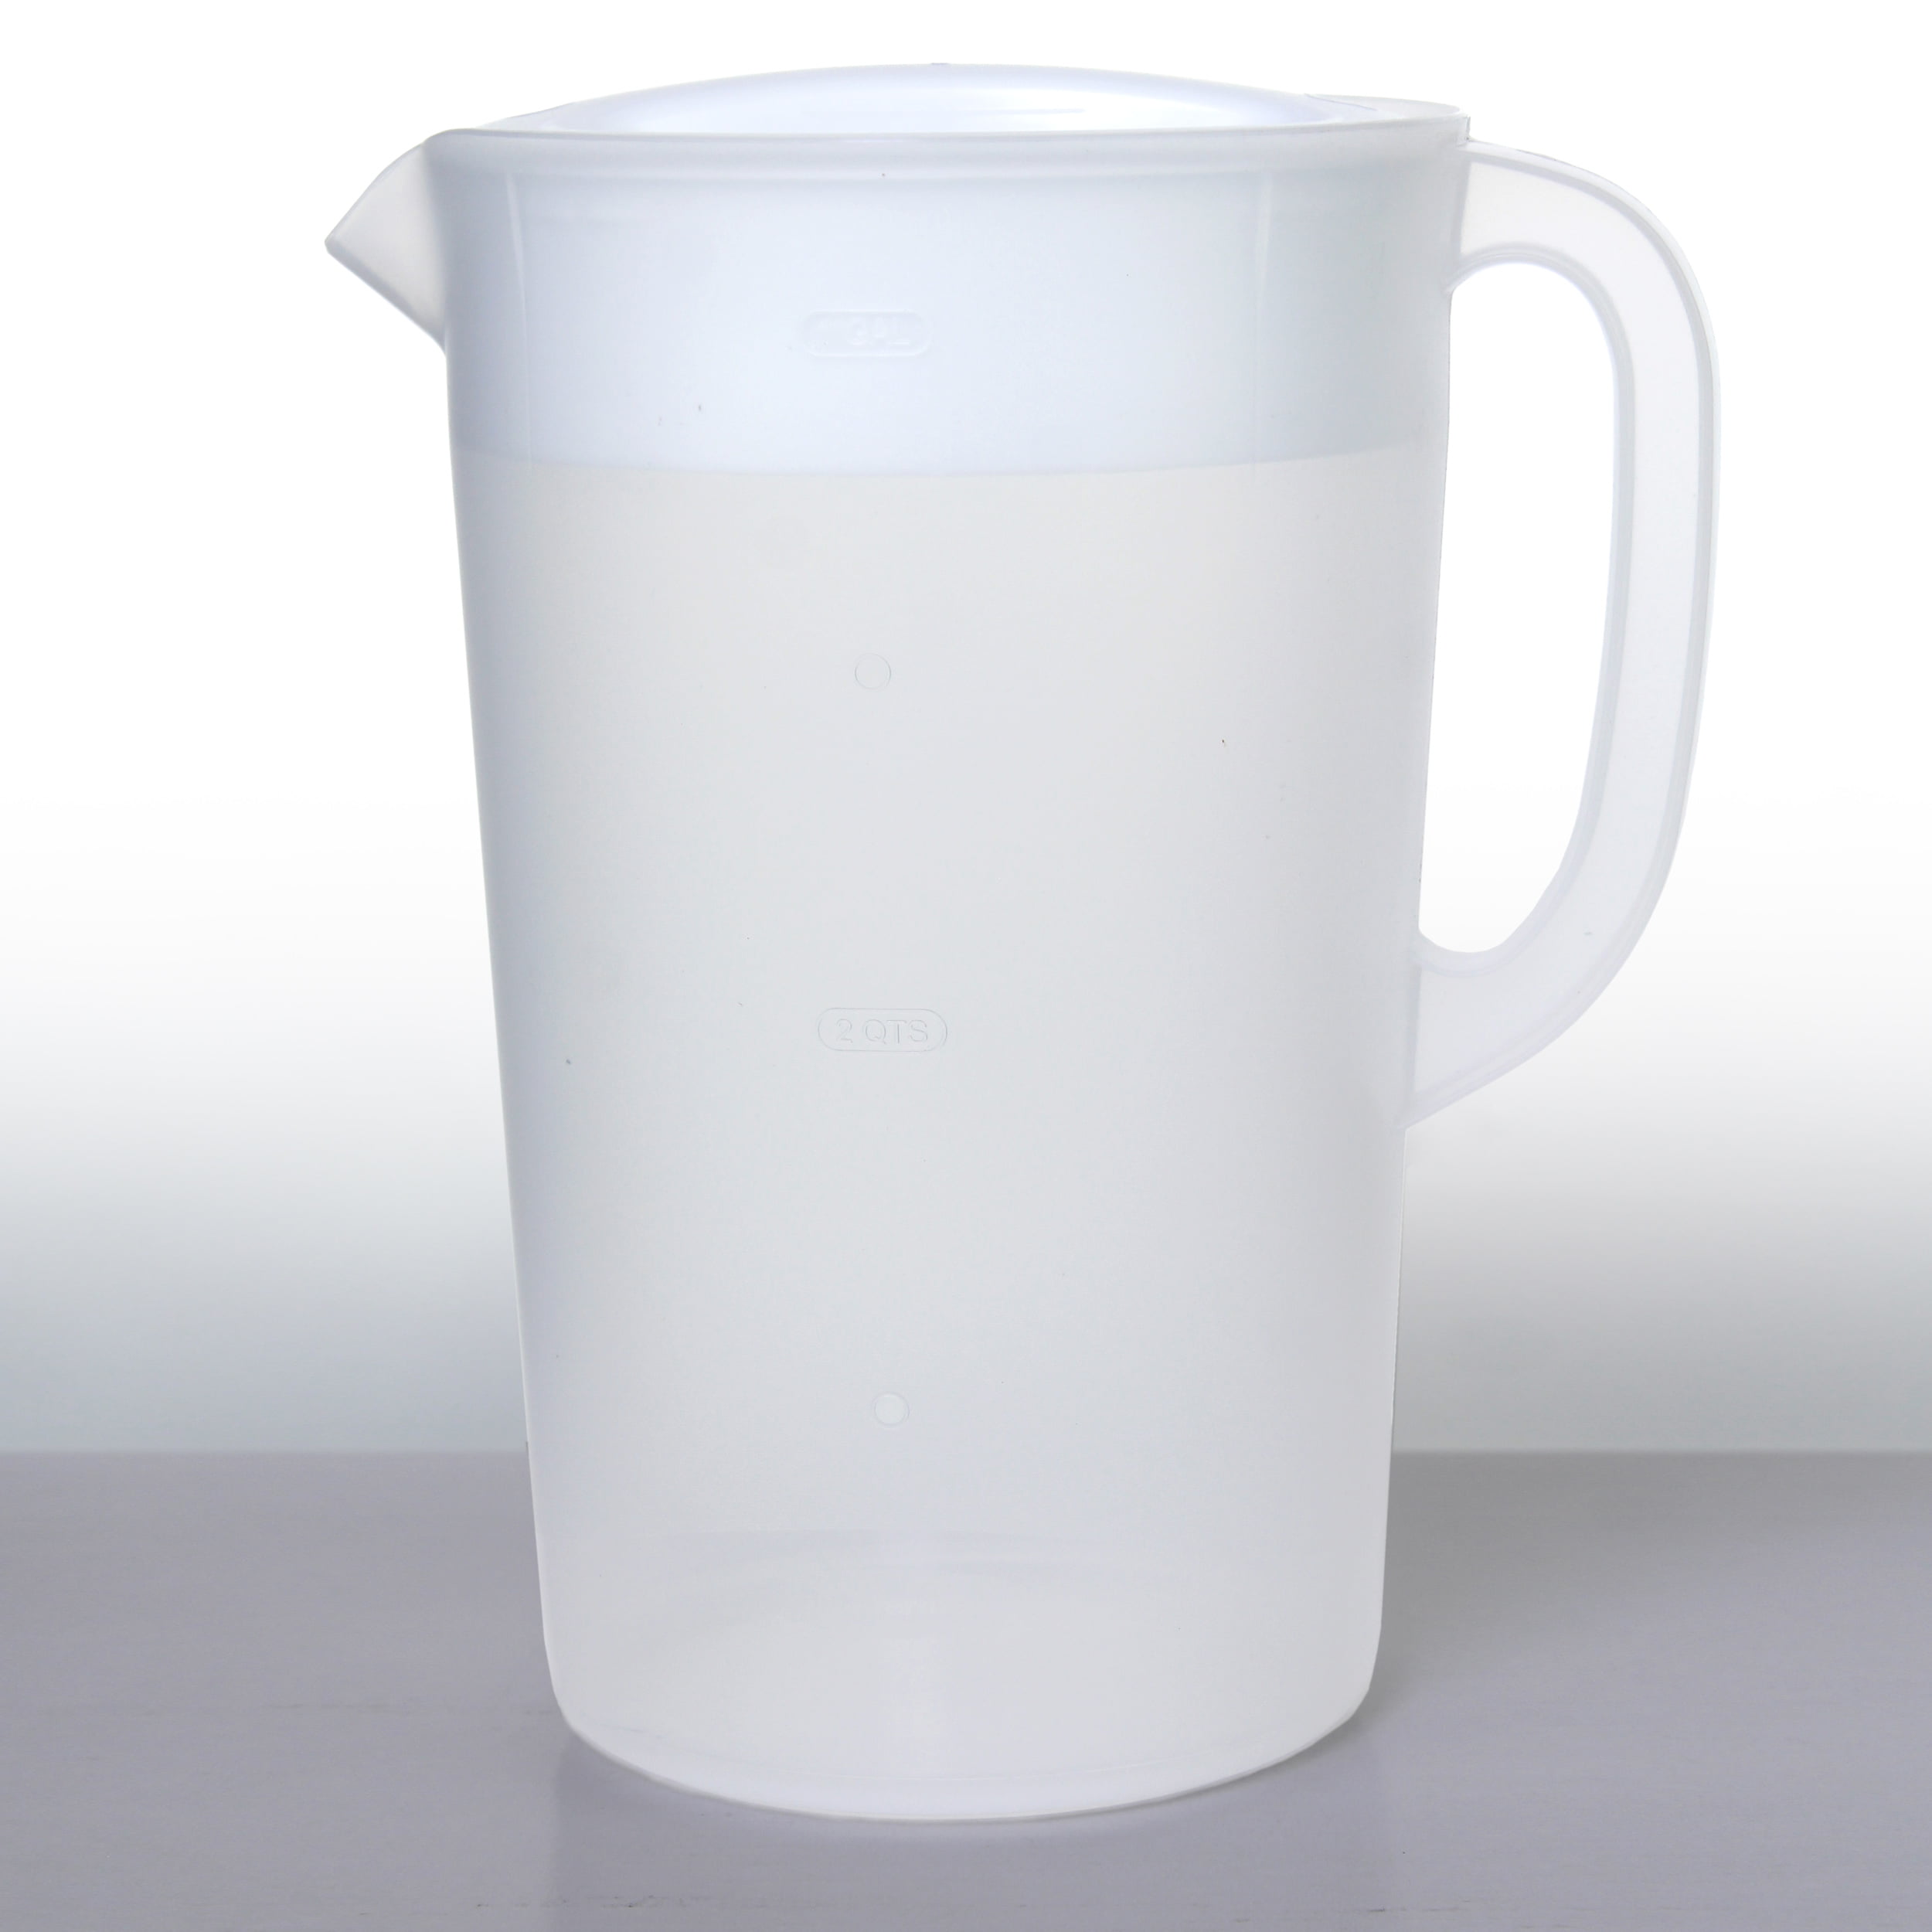 Save on Rubbermaid Pitcher with Ice Guard 1 Gallon Order Online